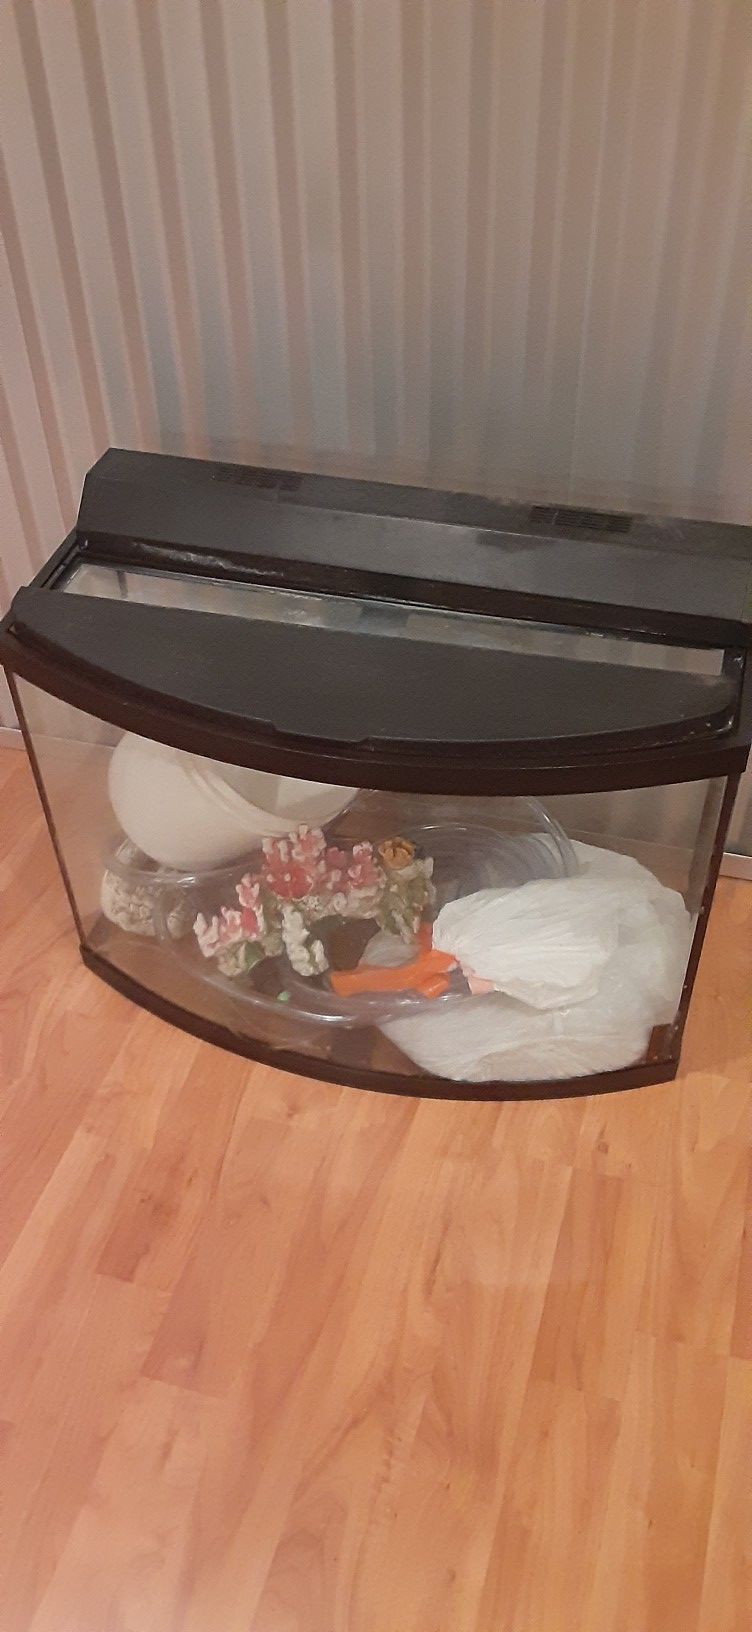 30 gallon aquarium with substraight, filter, cartriges, lid, decor, python fish vaccum, multicolor led strip, air pump, fish food and remedies